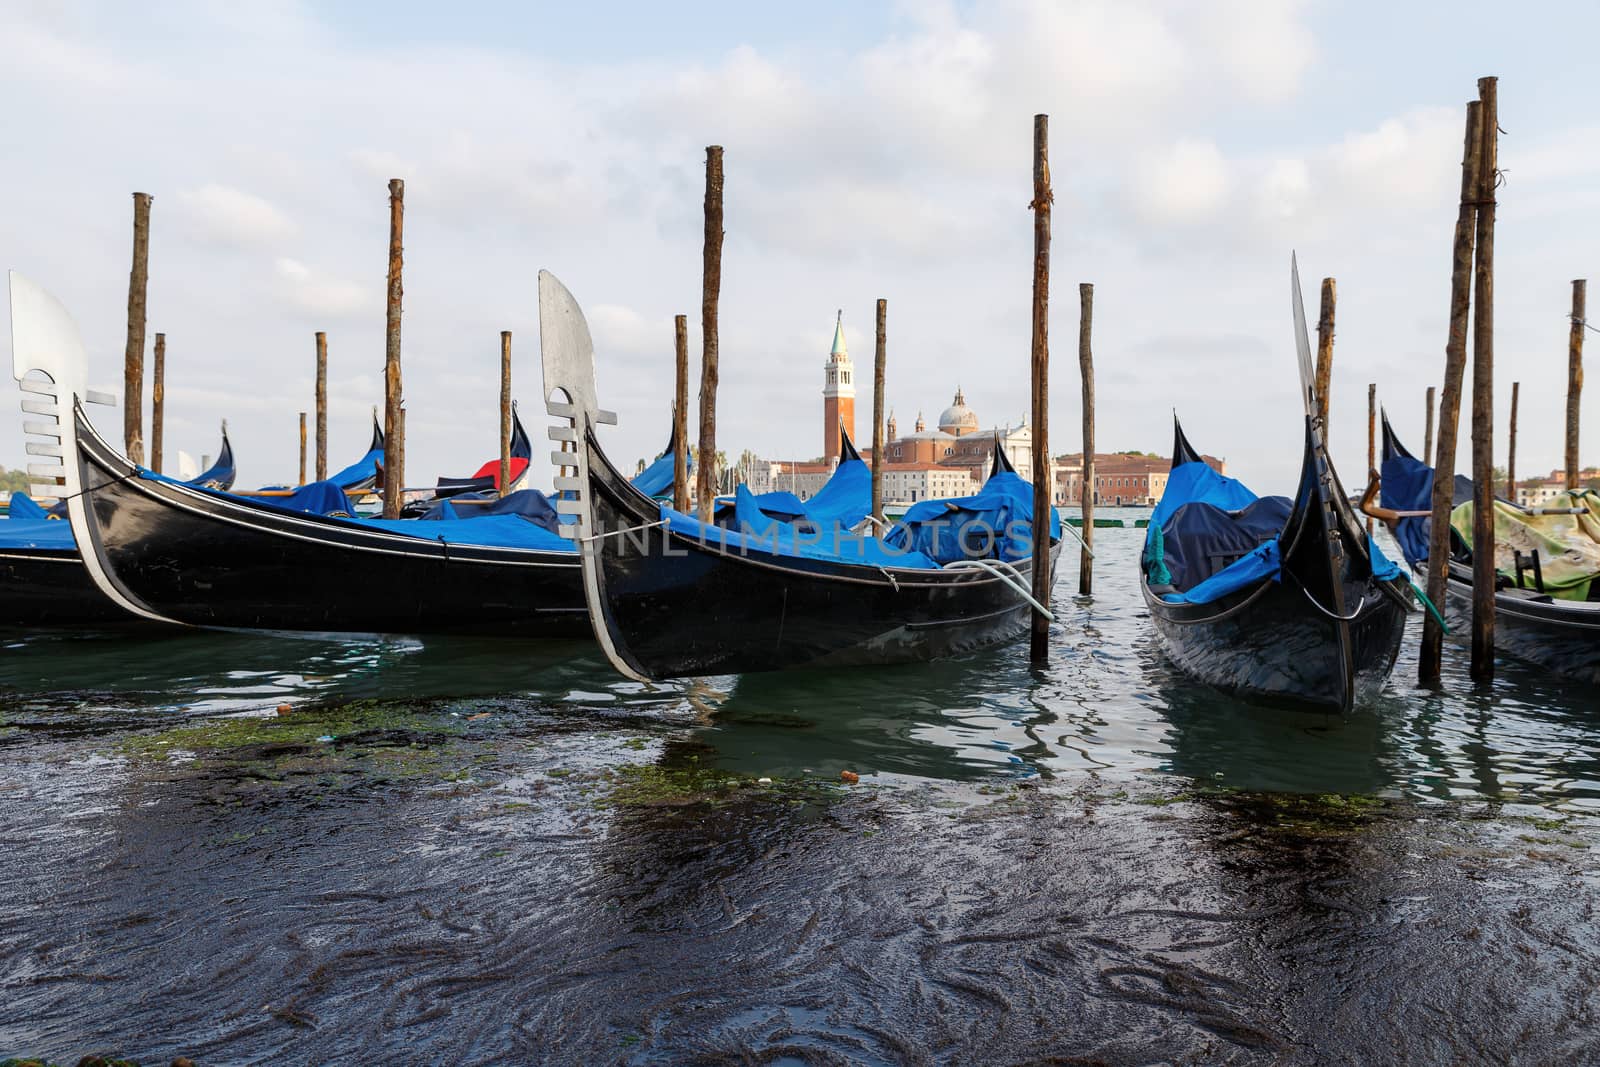 Venice, Italy - CIRCA 2020: View of empty gondolas on a water canal in Venice Italy. Concept of the effects of lock down due to CoronaVirus COVID-19. Picturesque landscape.